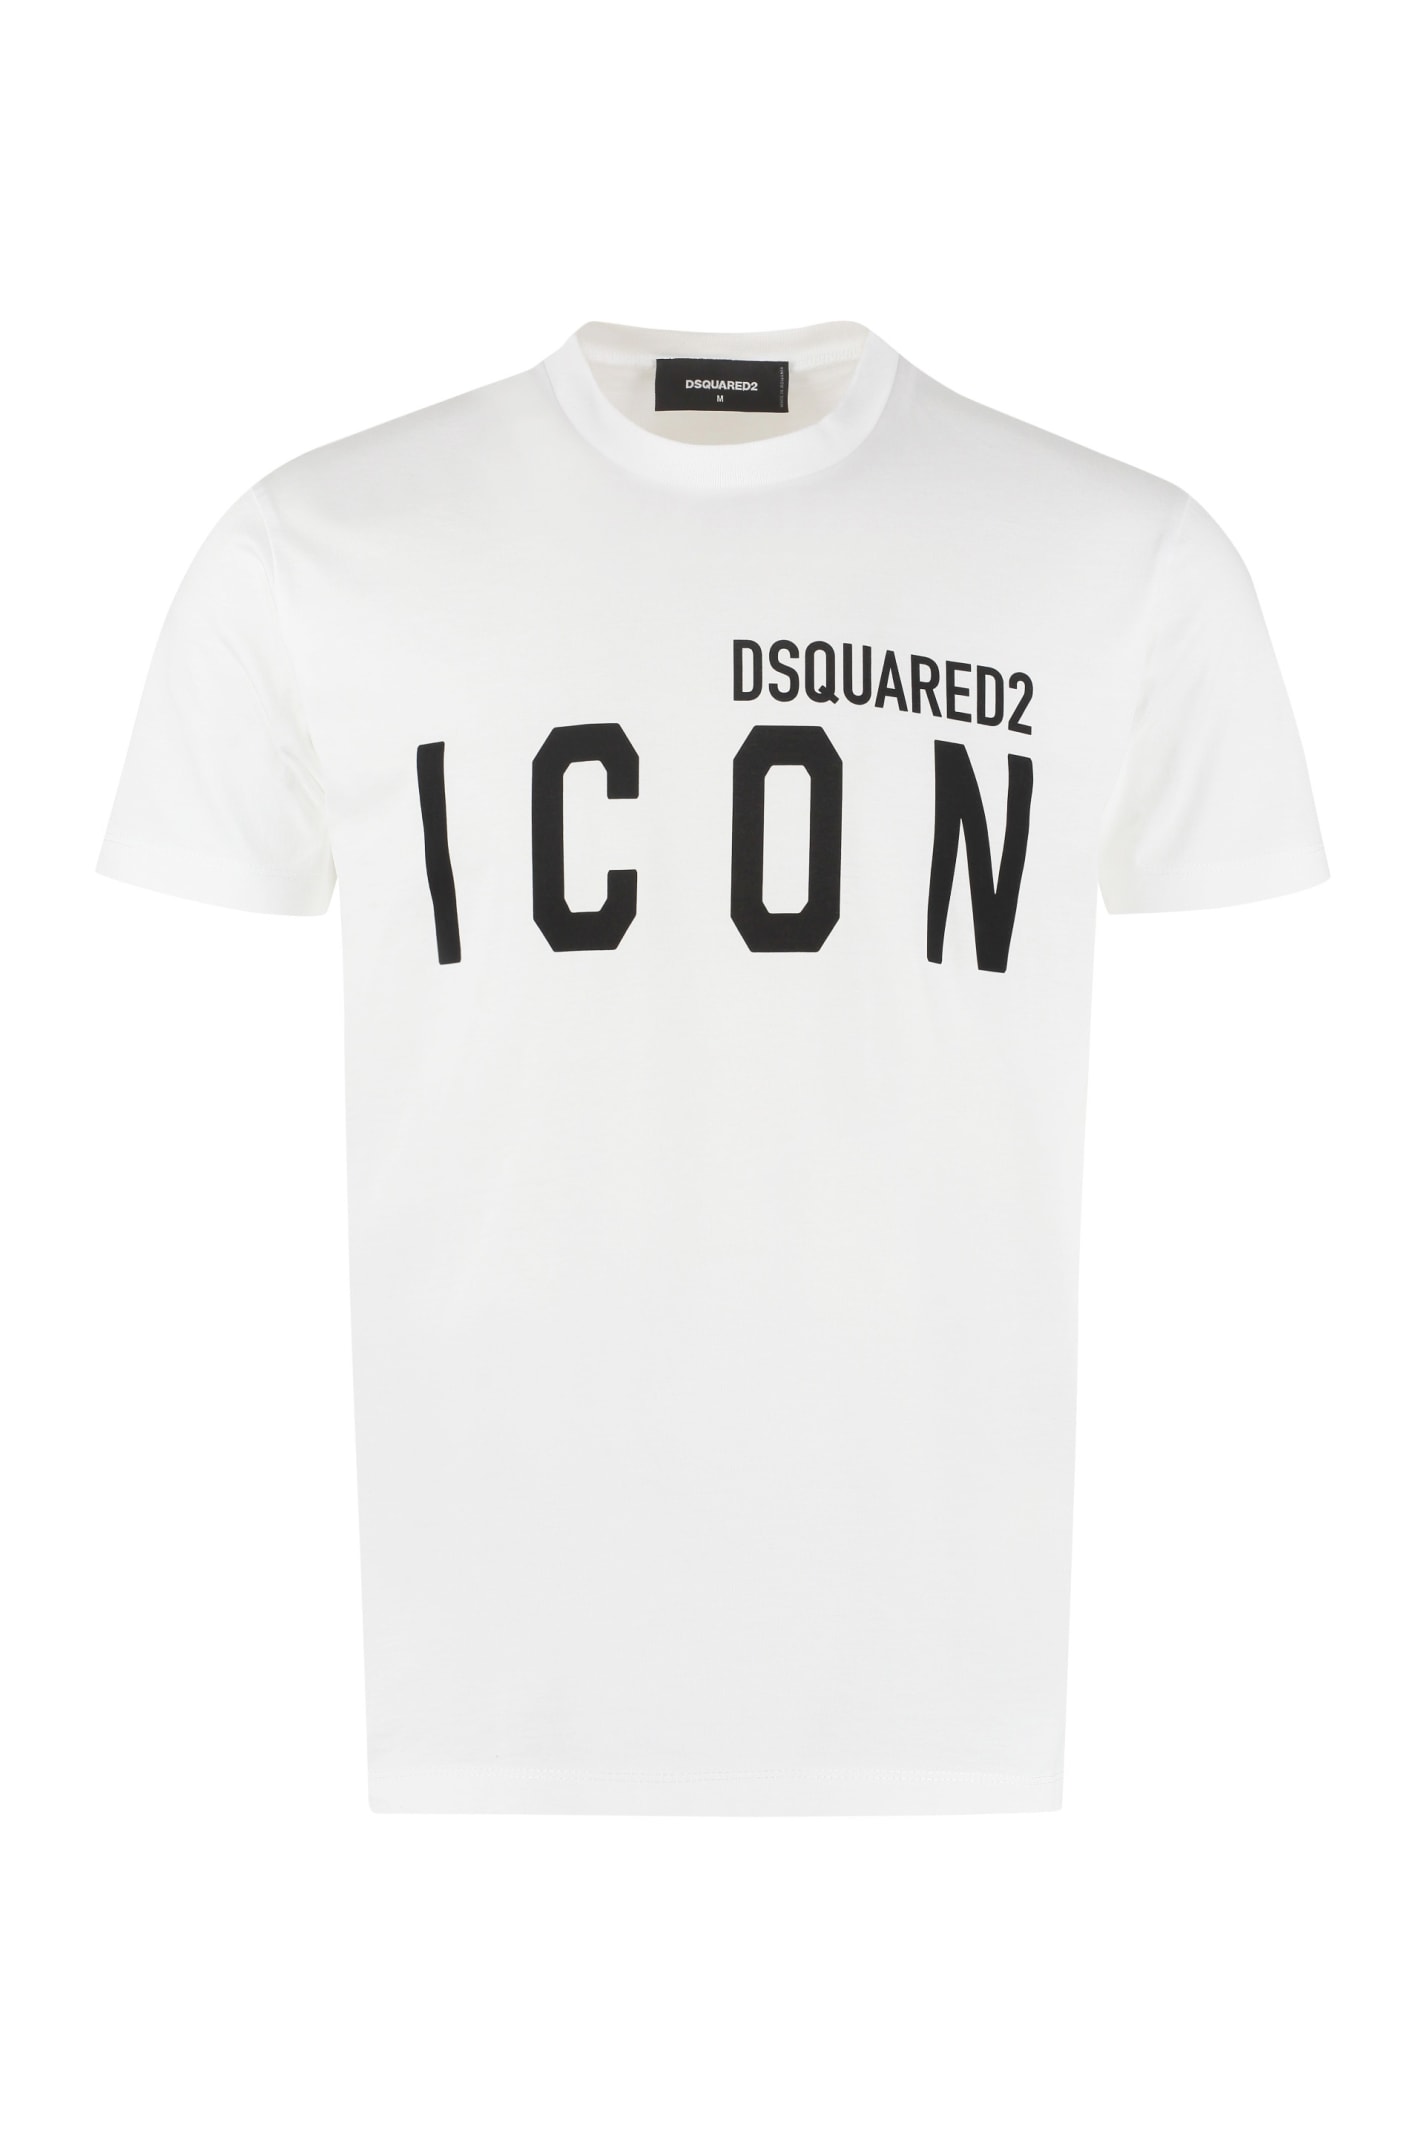 Details about   Dsquared2 Winged Skull Holographic Mens Black T-Shirt 